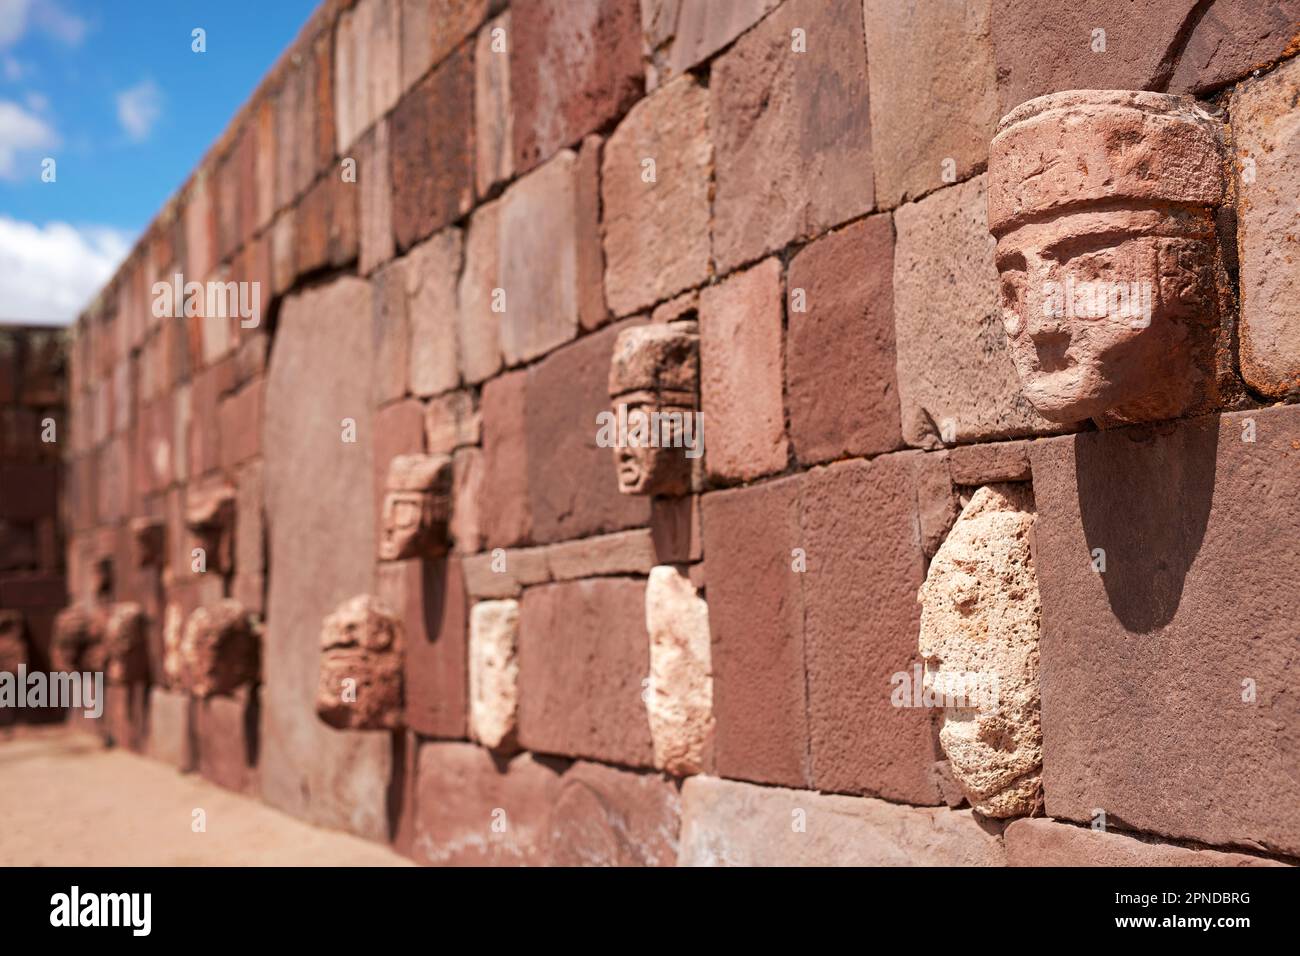 Heads carved on a wall inside Tiwanaku (Spanish: Tiahuanaco), near Lake Titicaca, Bolivia. One of the largest pre-Columbian archaeological sites. Stock Photo